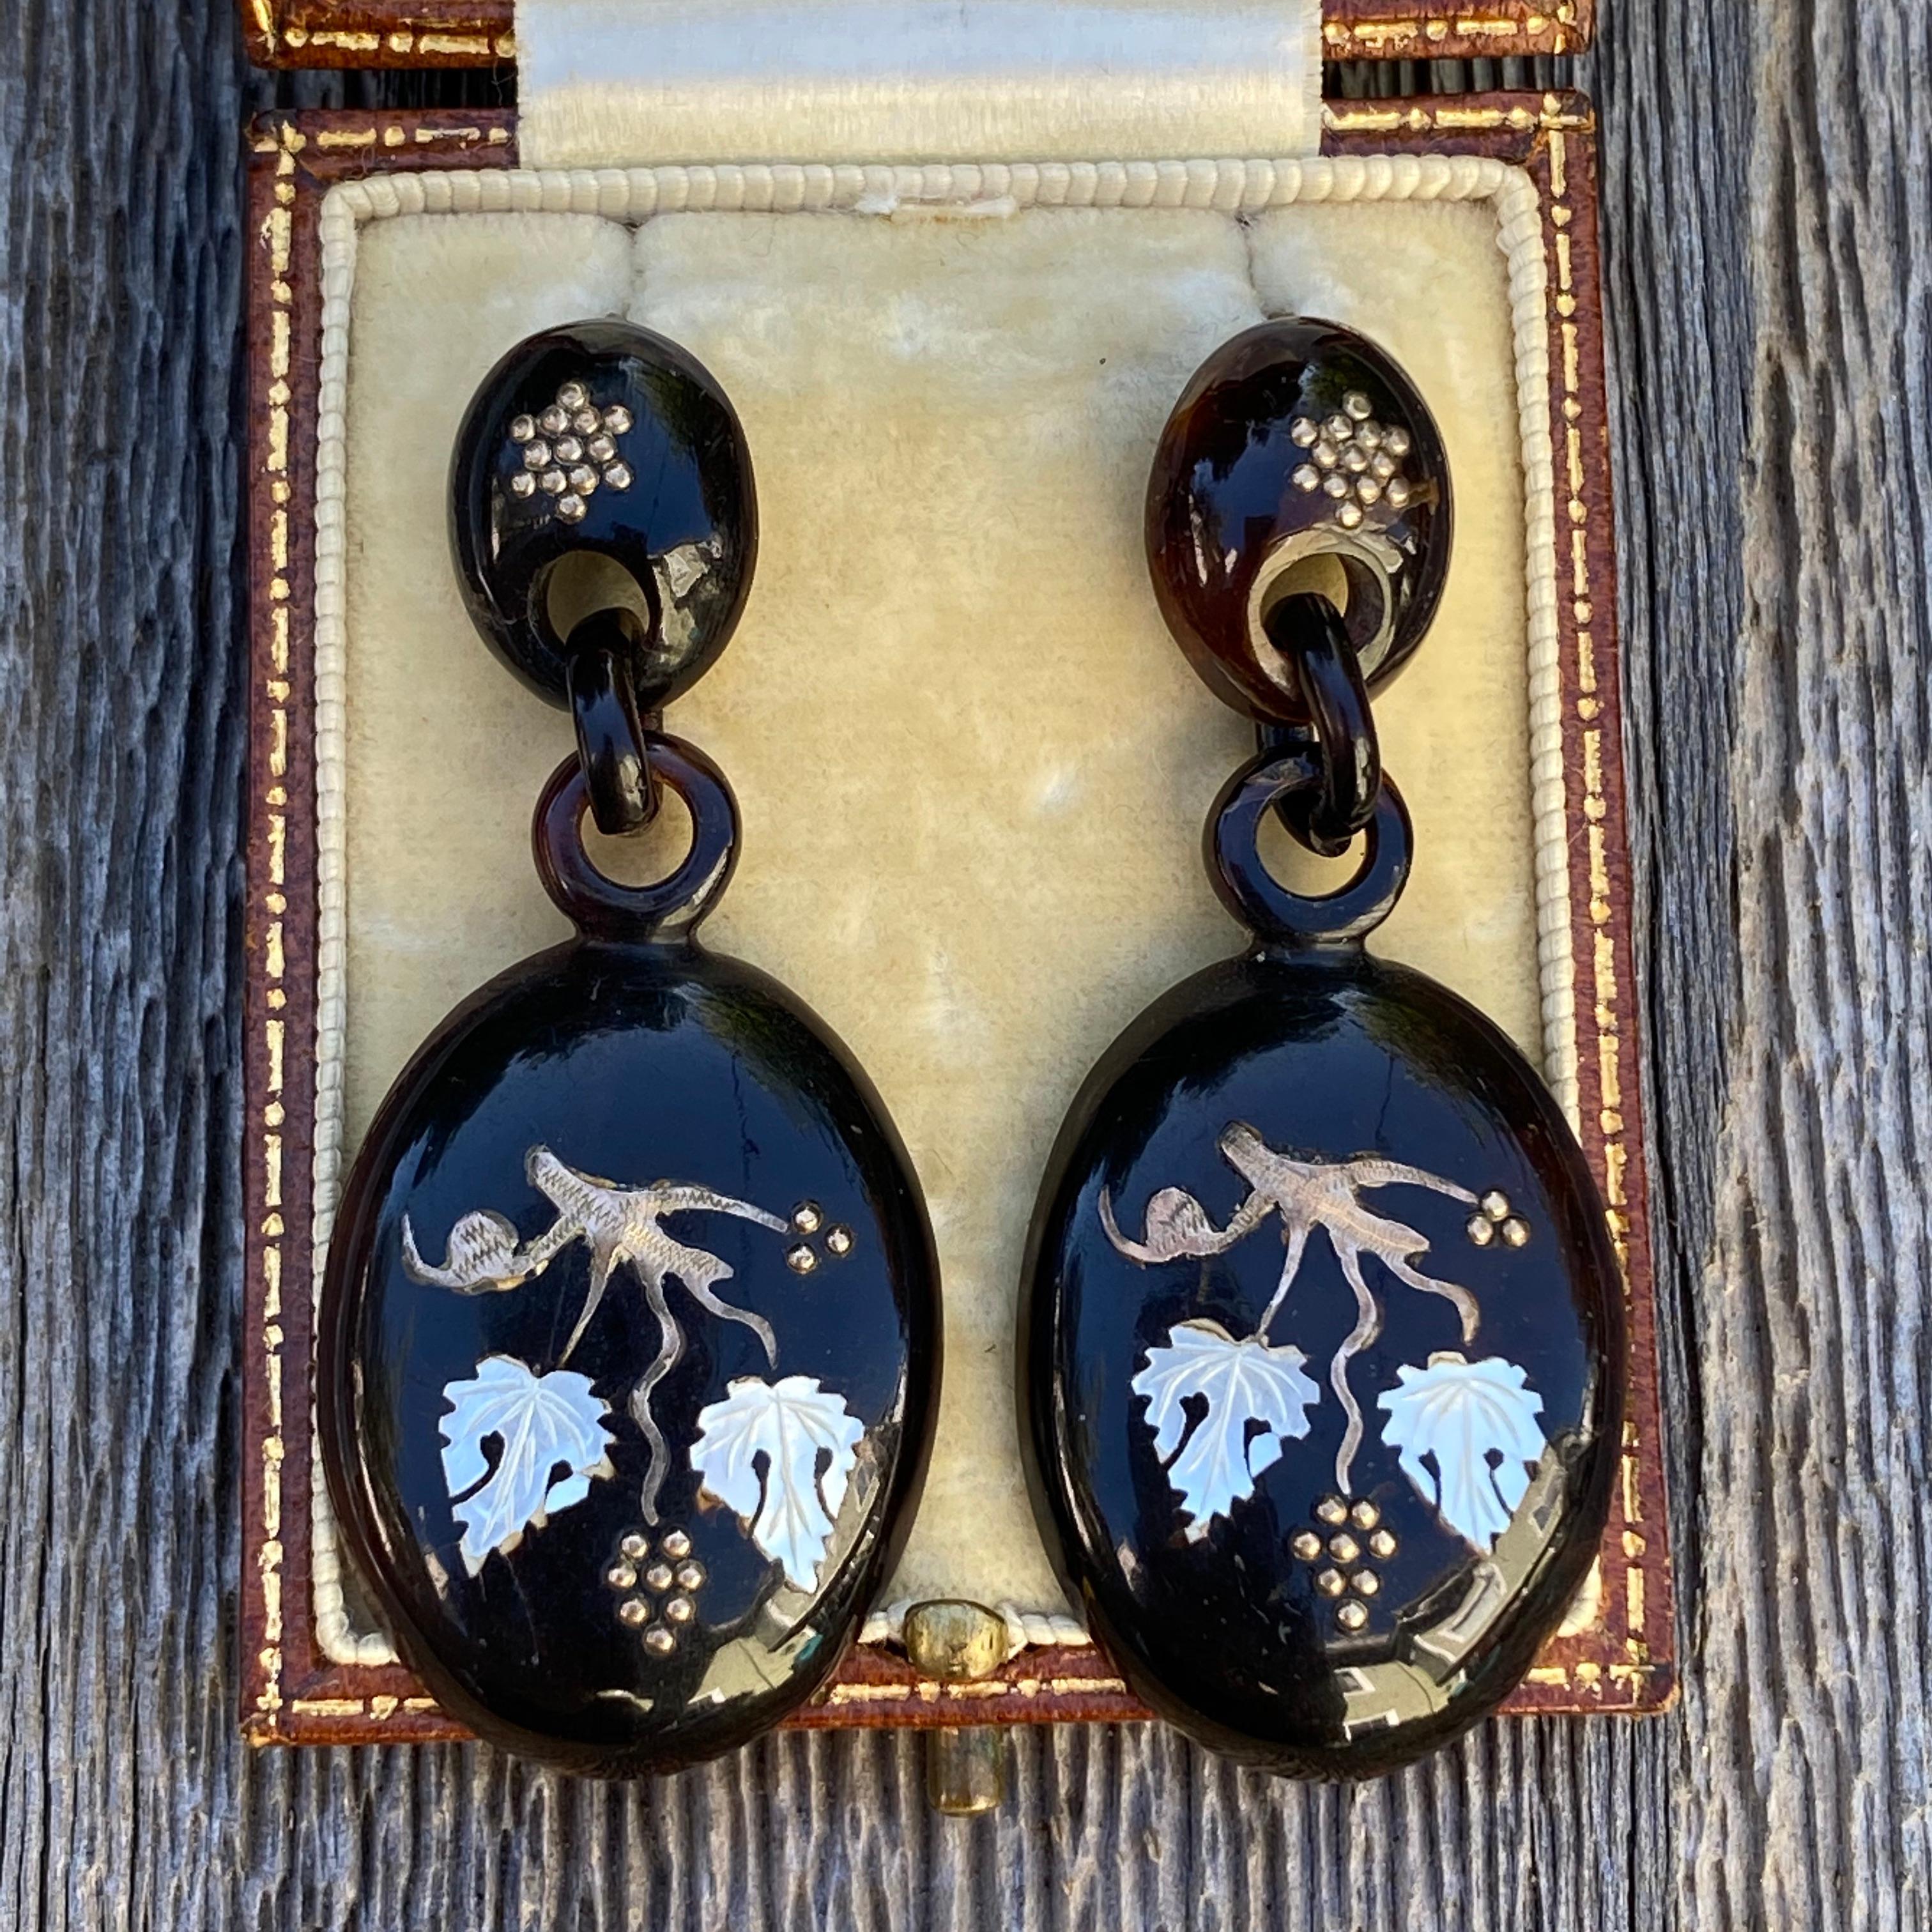 Details: 
Stunning Victorian detailed inlay earrings with 9K gold and shell details. These earrings are magnificent, and very dramatic. They have etched gold inlay with sweet grape vine pattern. The grapes are made of tiny gold beads, the vines are